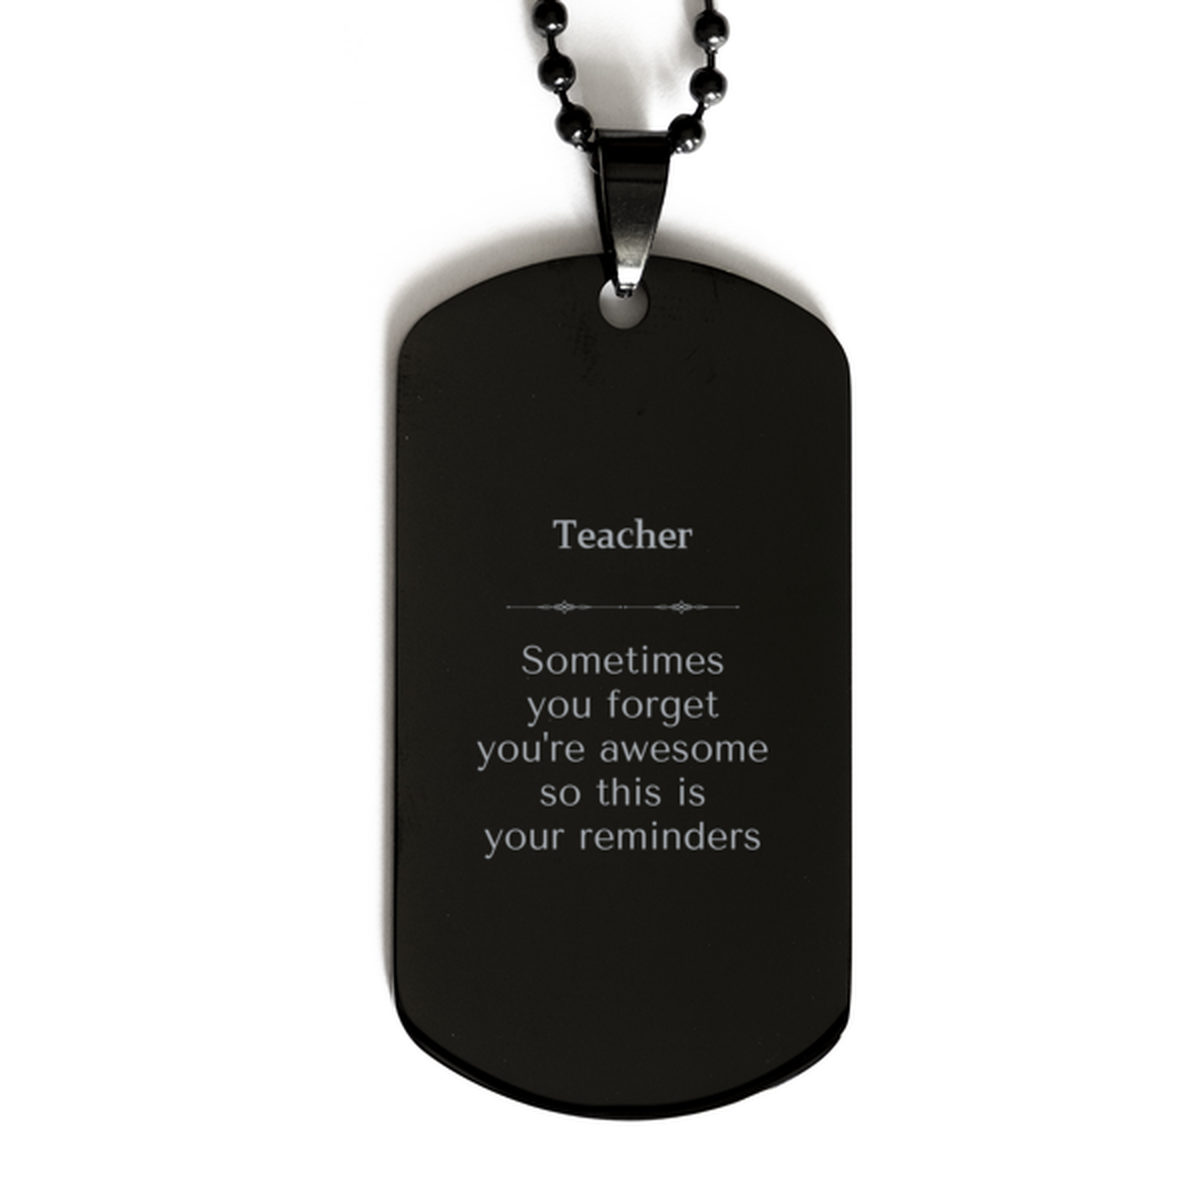 Sentimental Teacher Black Dog Tag, Teacher Sometimes you forget you're awesome so this is your reminders, Graduation Christmas Birthday Gifts for Teacher, Men, Women, Coworkers